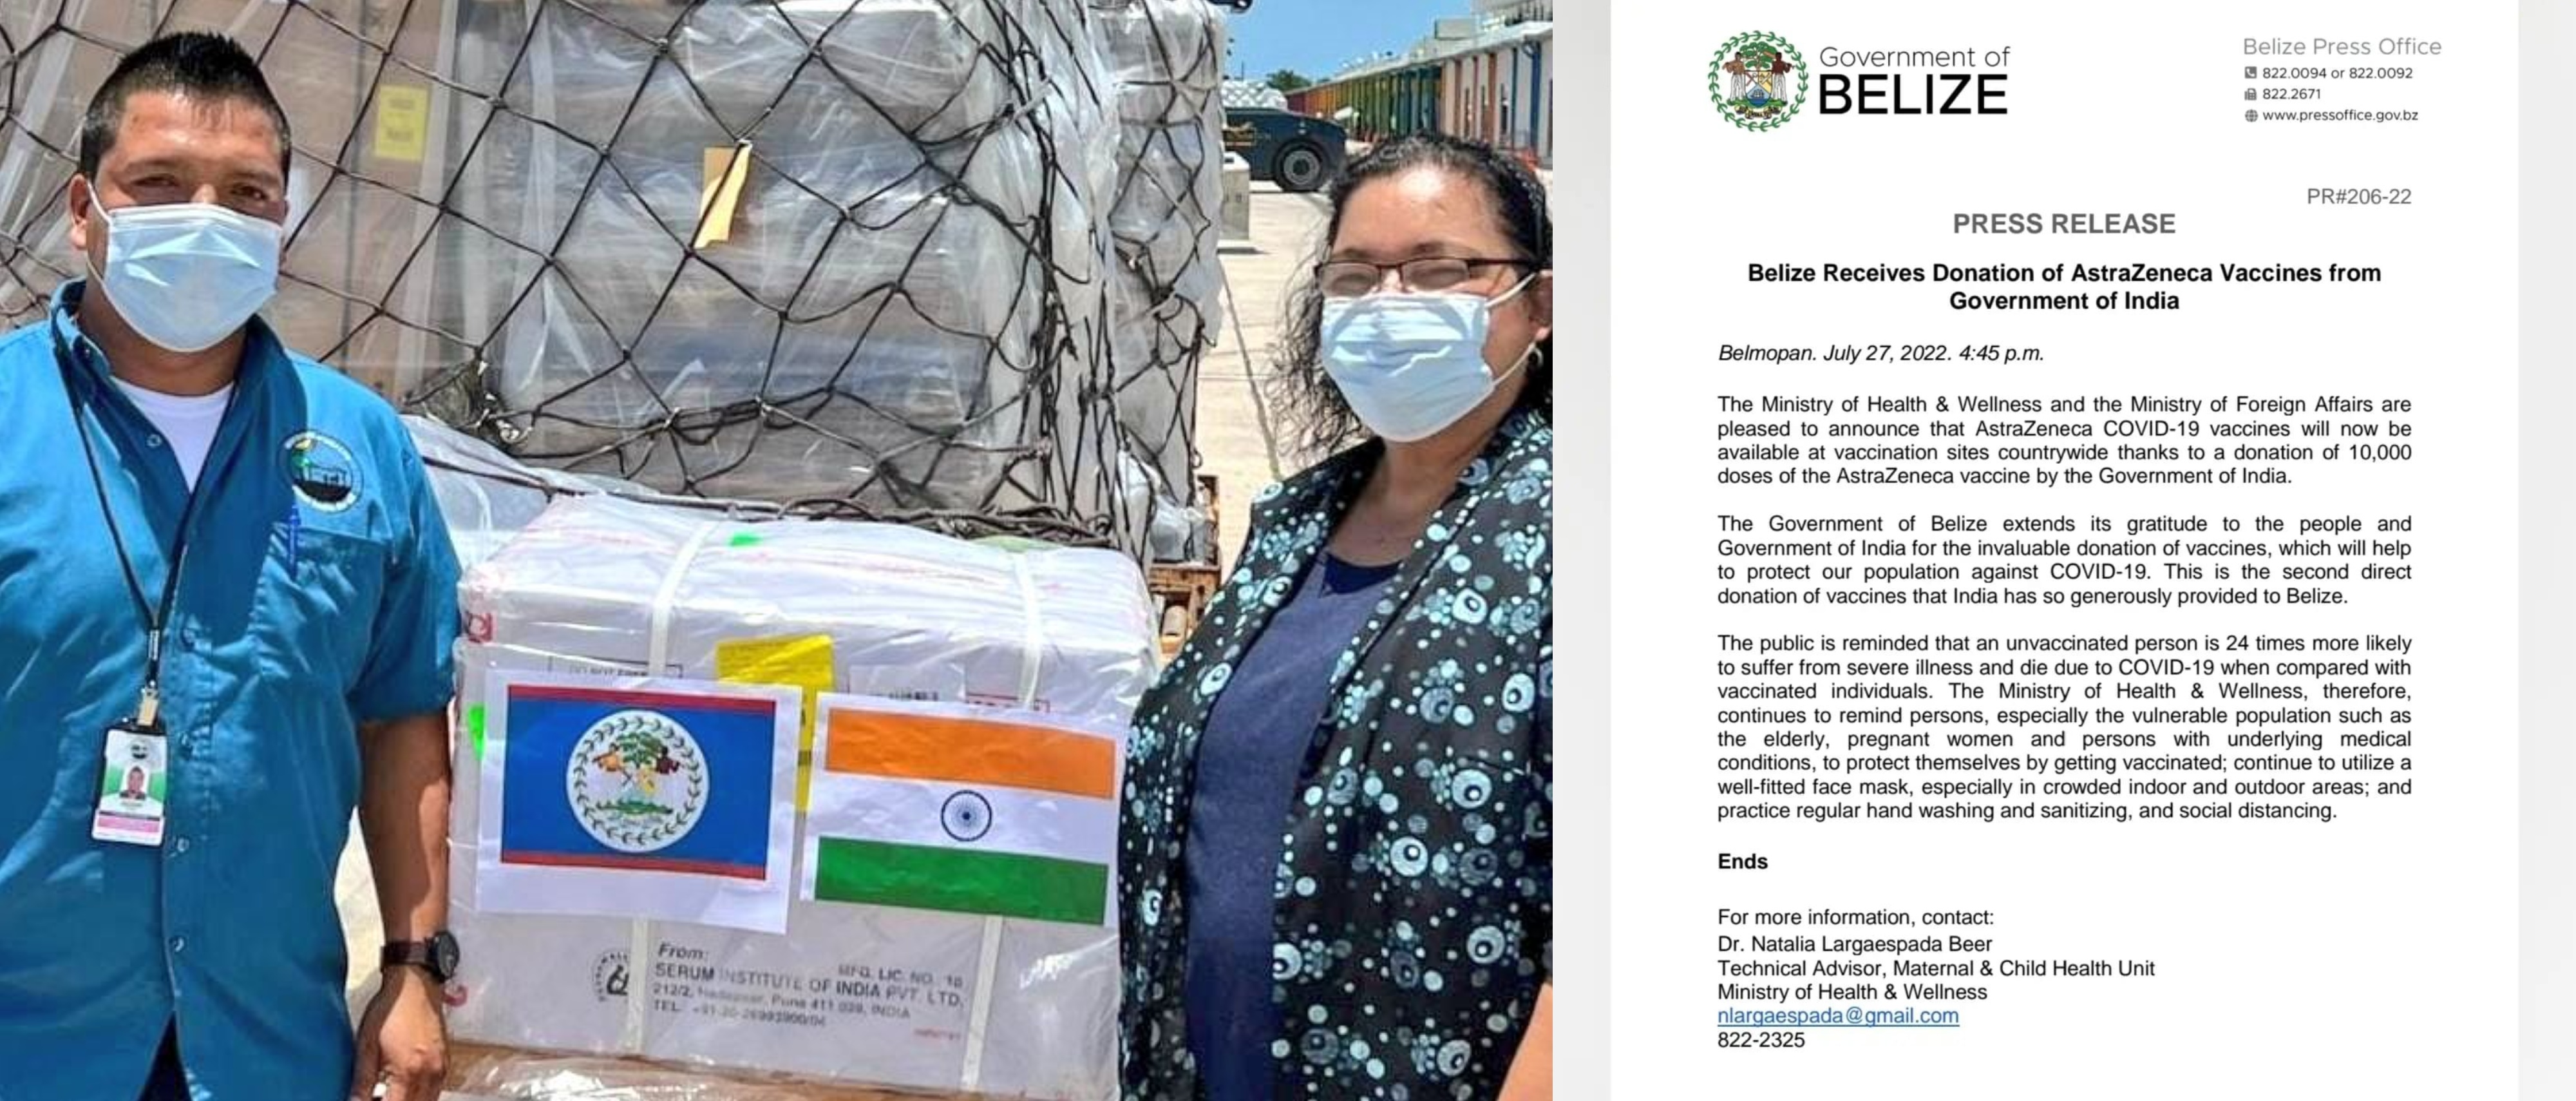  <div style="fcolor: #fff; font-weight: 600; font-size: 1.5em;">
<p style="font-size: 13.8px;"> India-Belize 
|Pharmacy of the world | Vaccine Maitri continues as
India donates 10,000 doses of AstraZeneca vaccines to Belize to support it in its fight against COVID-19


<br /><span style="text-align: center;">27 July 2022</span></p>
</div>